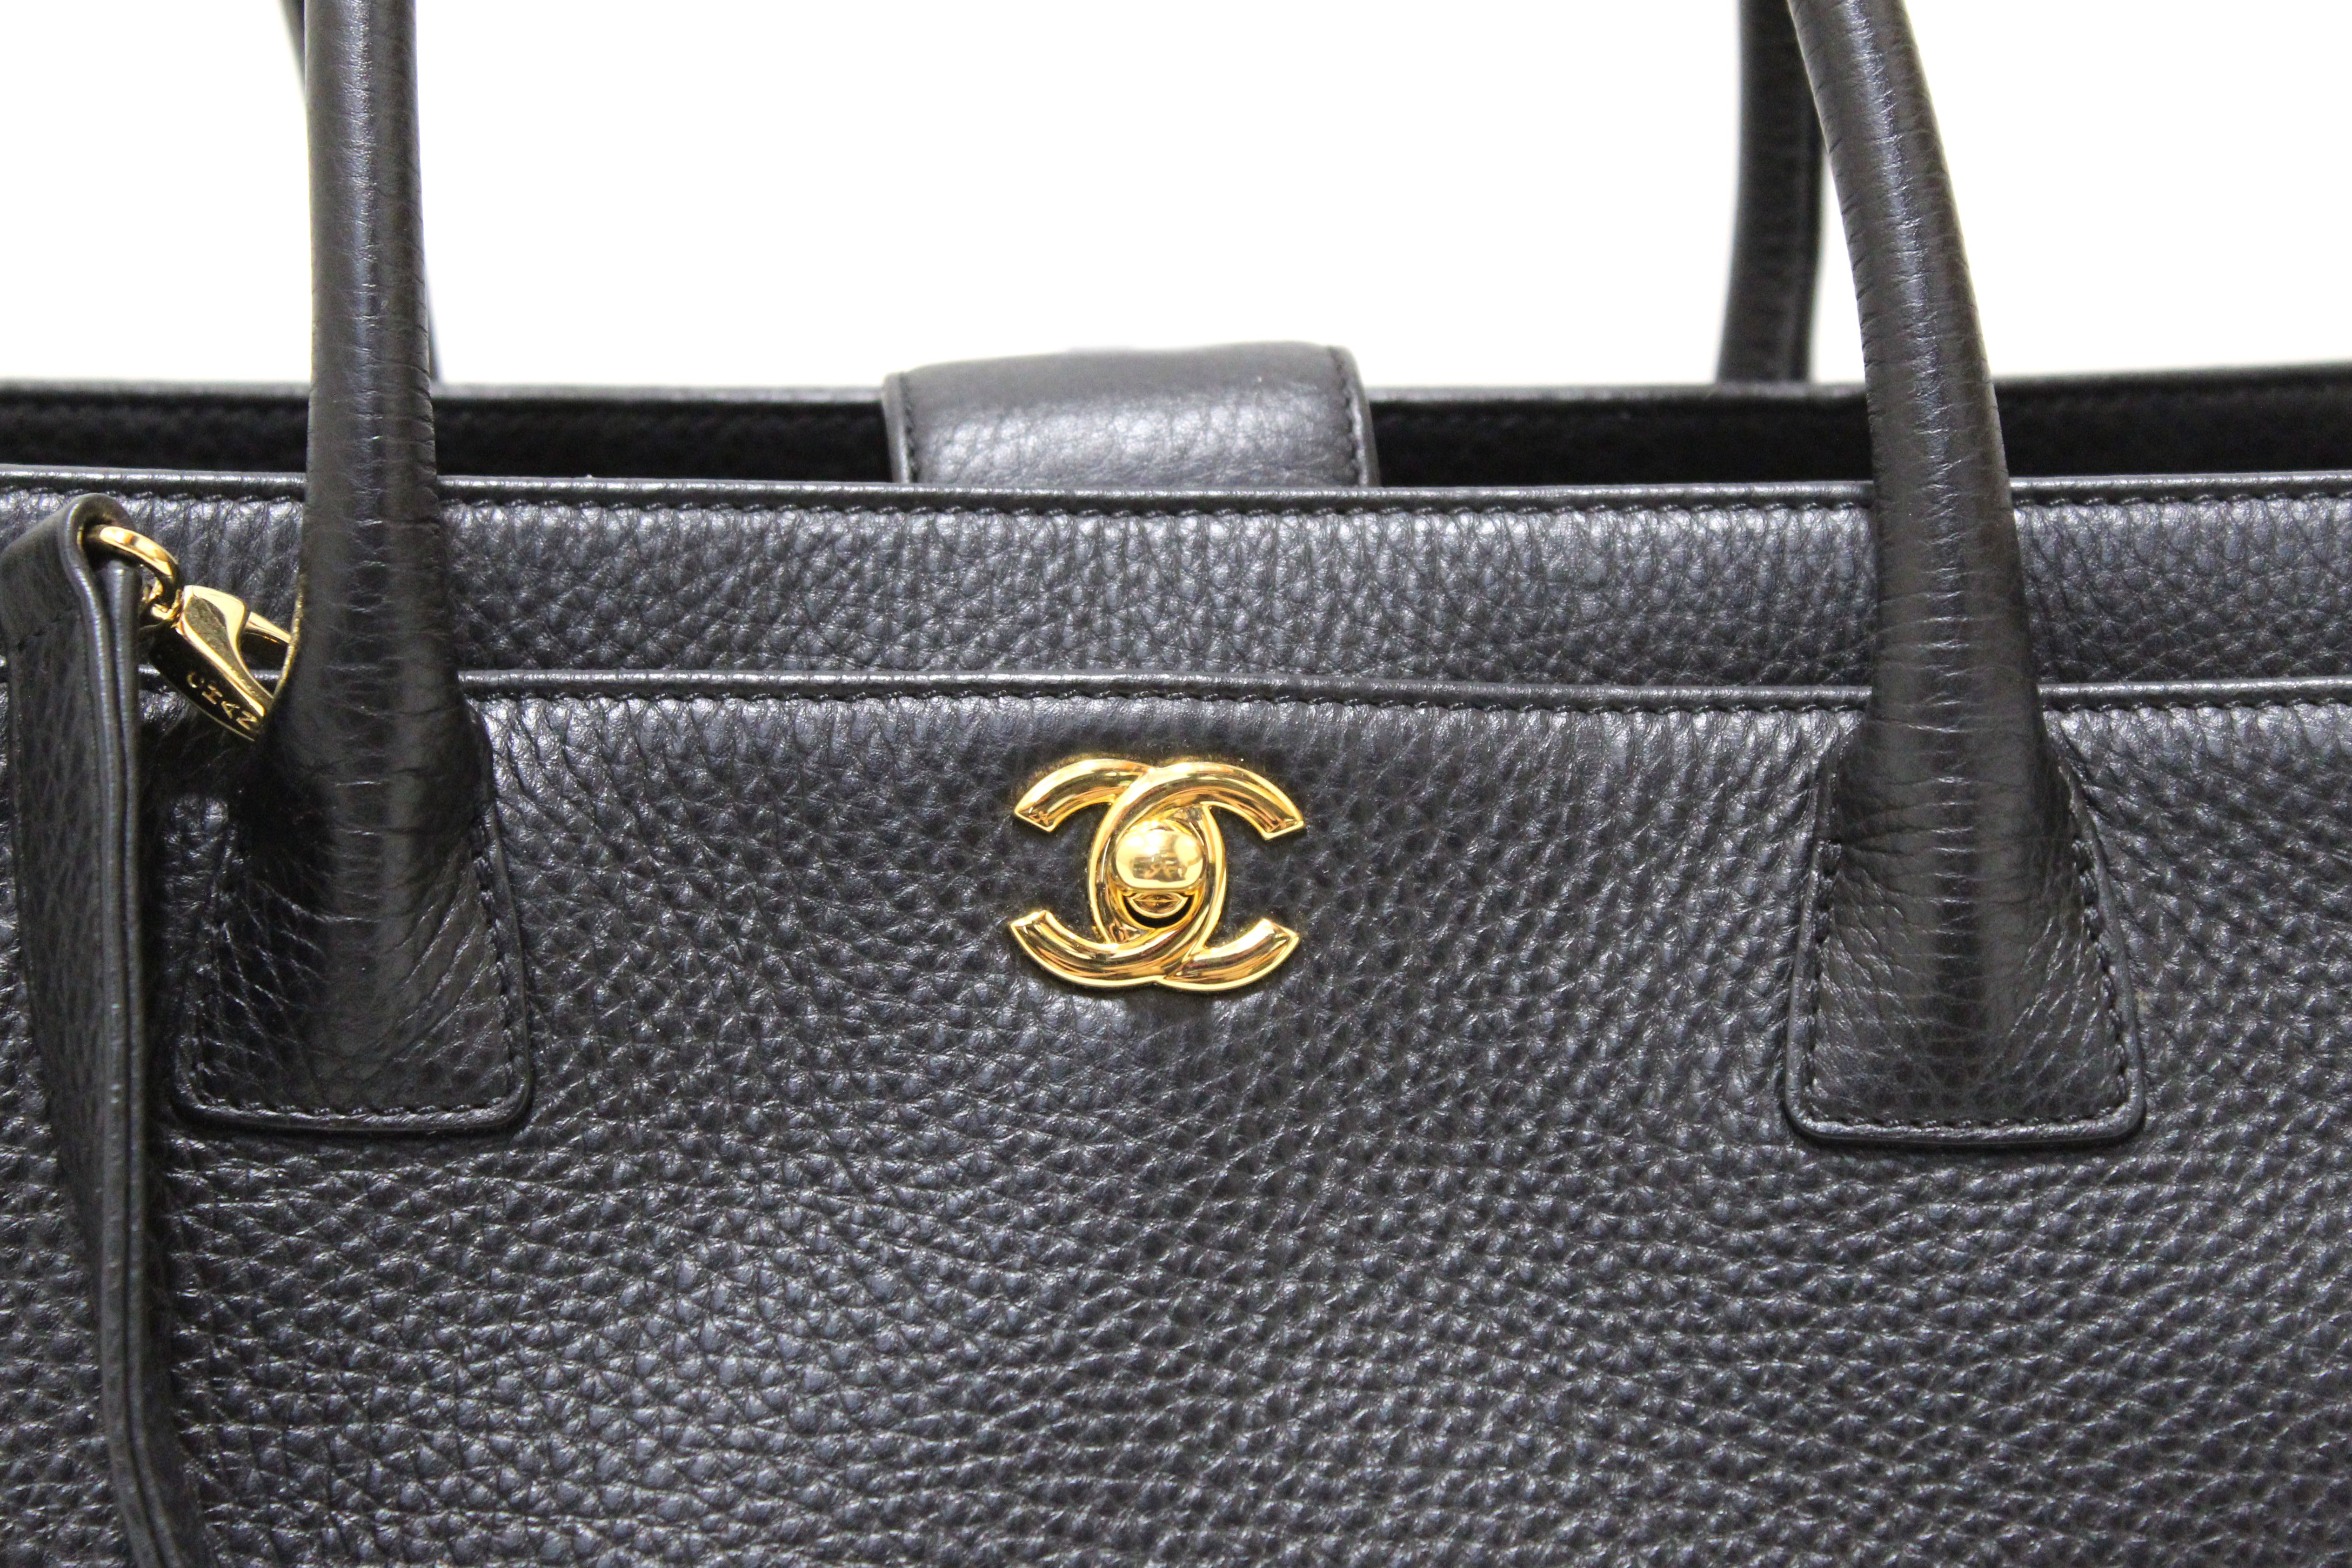 CHANEL Black Caviar Leather Cerf Tote Bag - The Purse Ladies